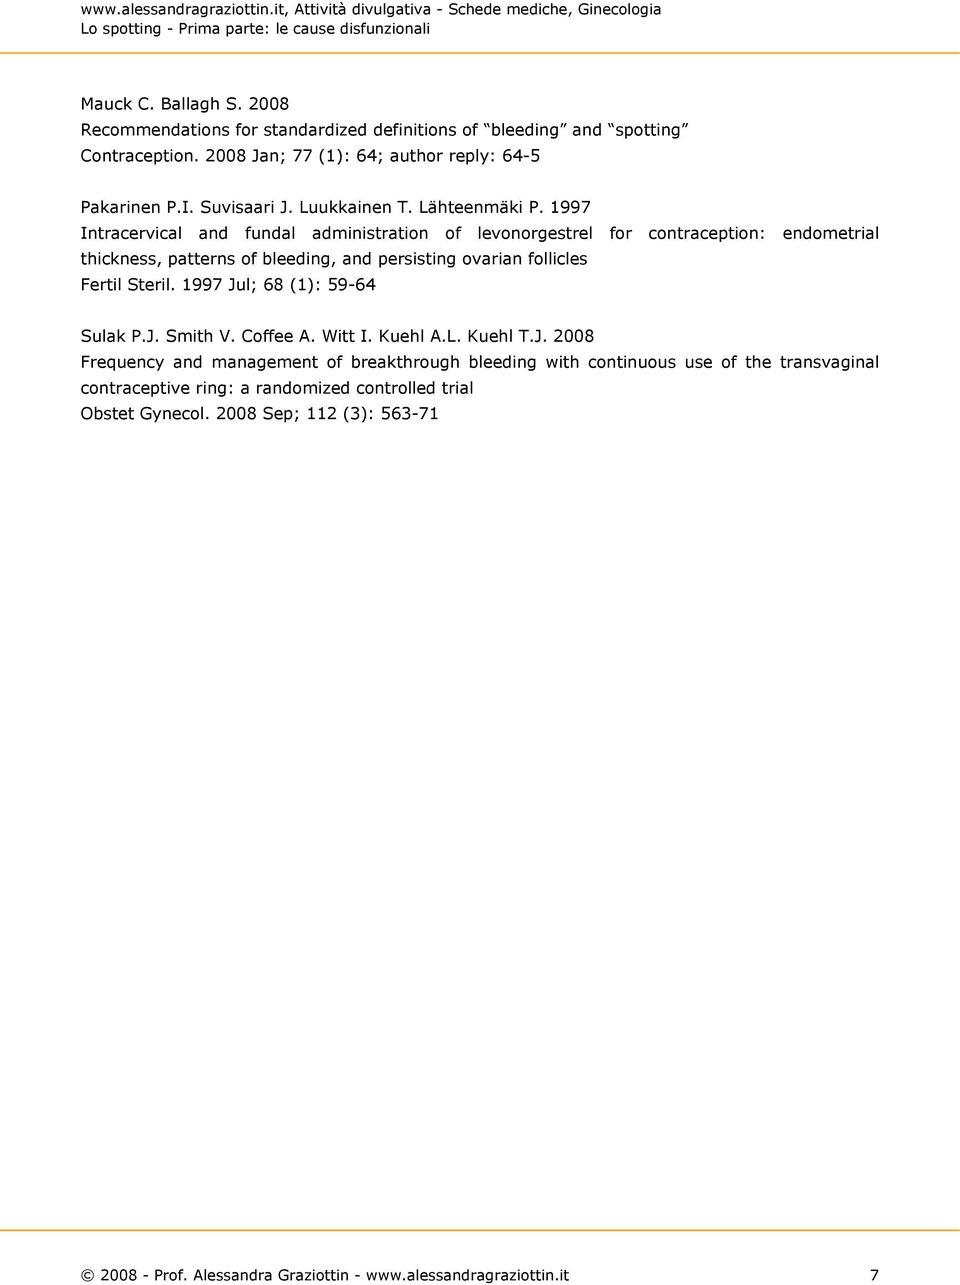 1997 Intracervical and fundal administration of levonorgestrel for contraception: endometrial thickness, patterns of bleeding, and persisting ovarian follicles